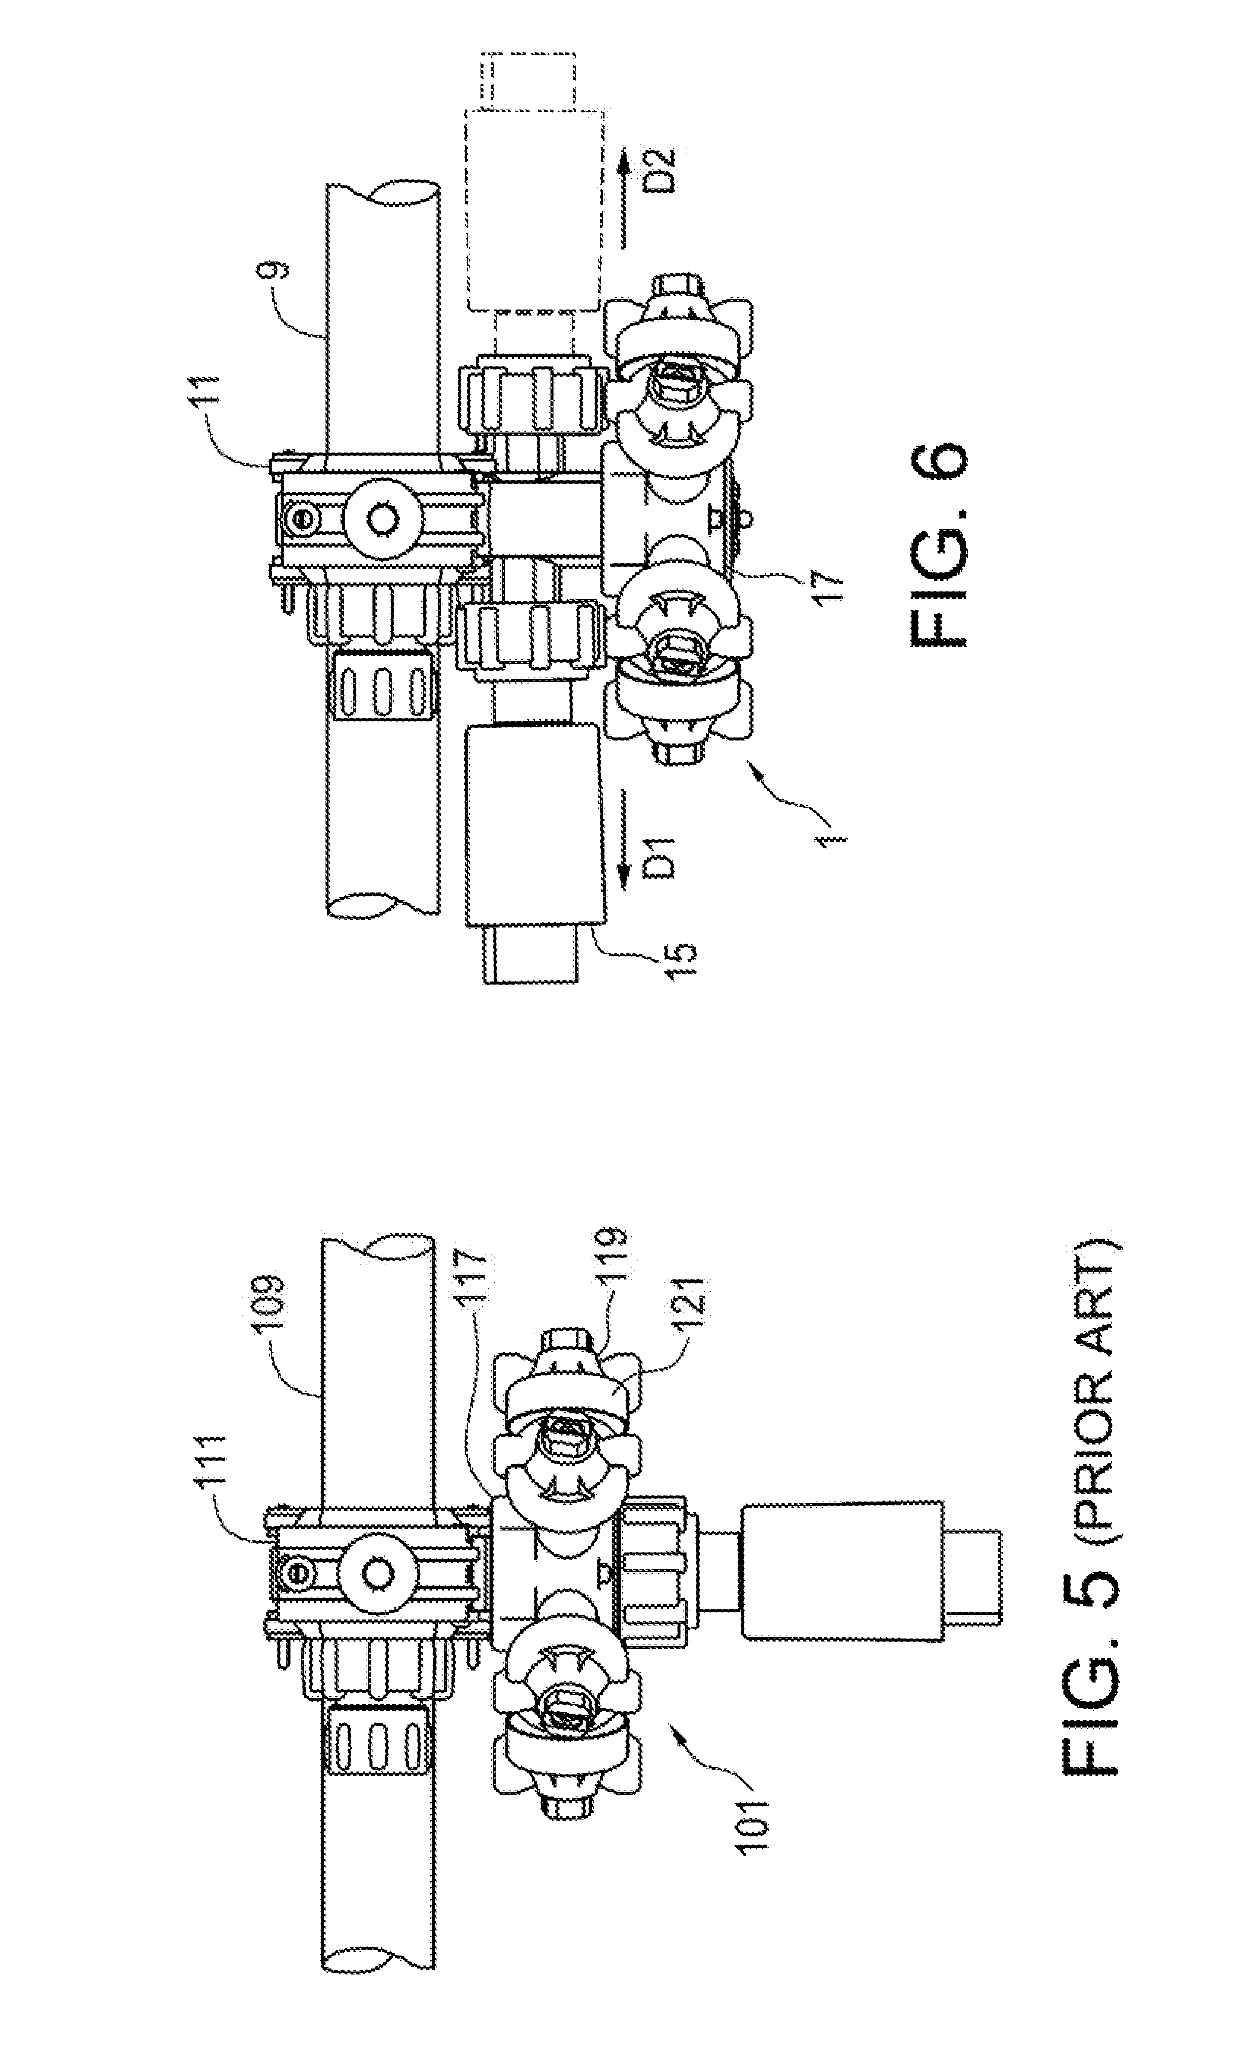 Multi-position sprayer component for spraying implements